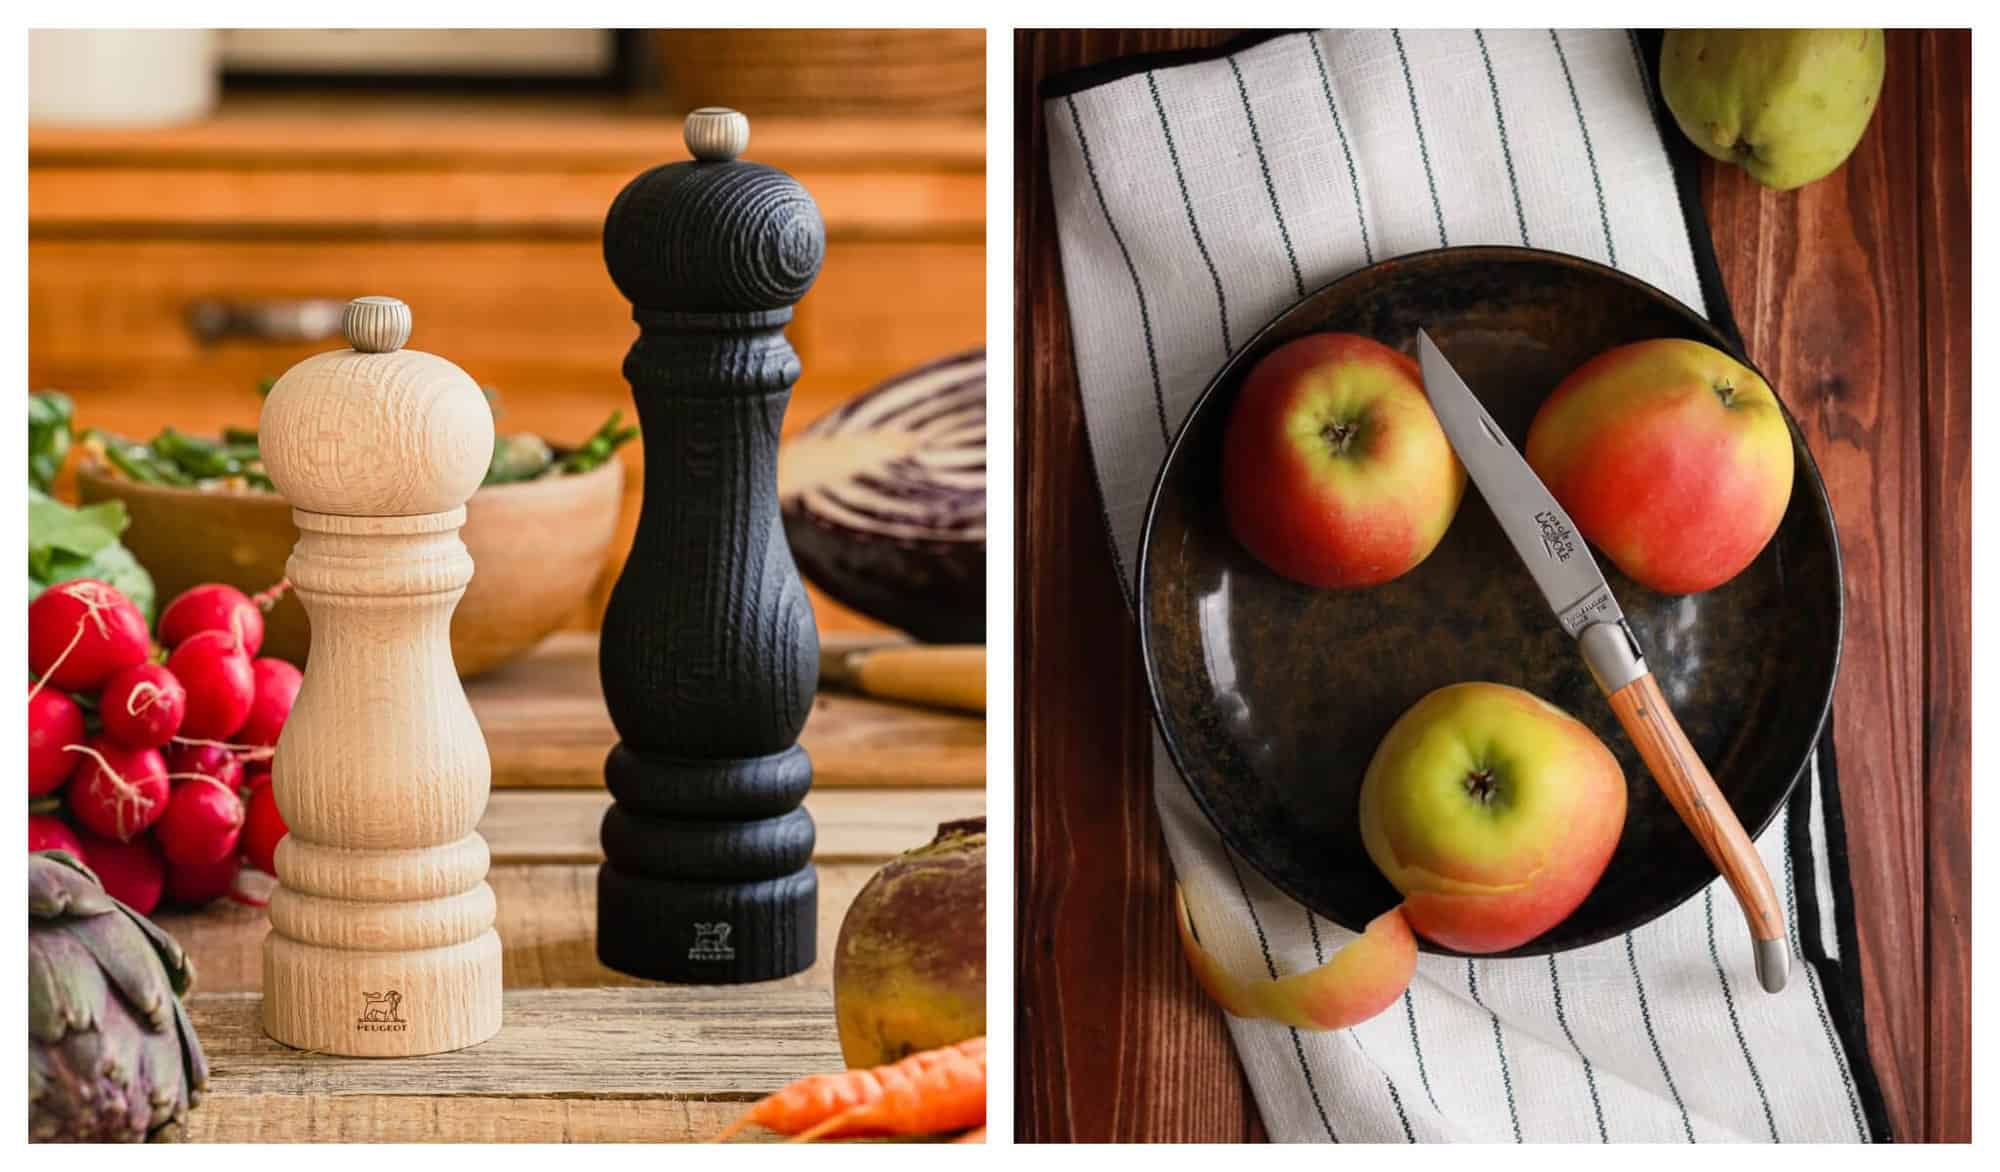 Left: A set of salt and pepper mills — a small beige salt mill and a taller black pepper mill. Right: 3 red apples on a brown plate with wooden knife.